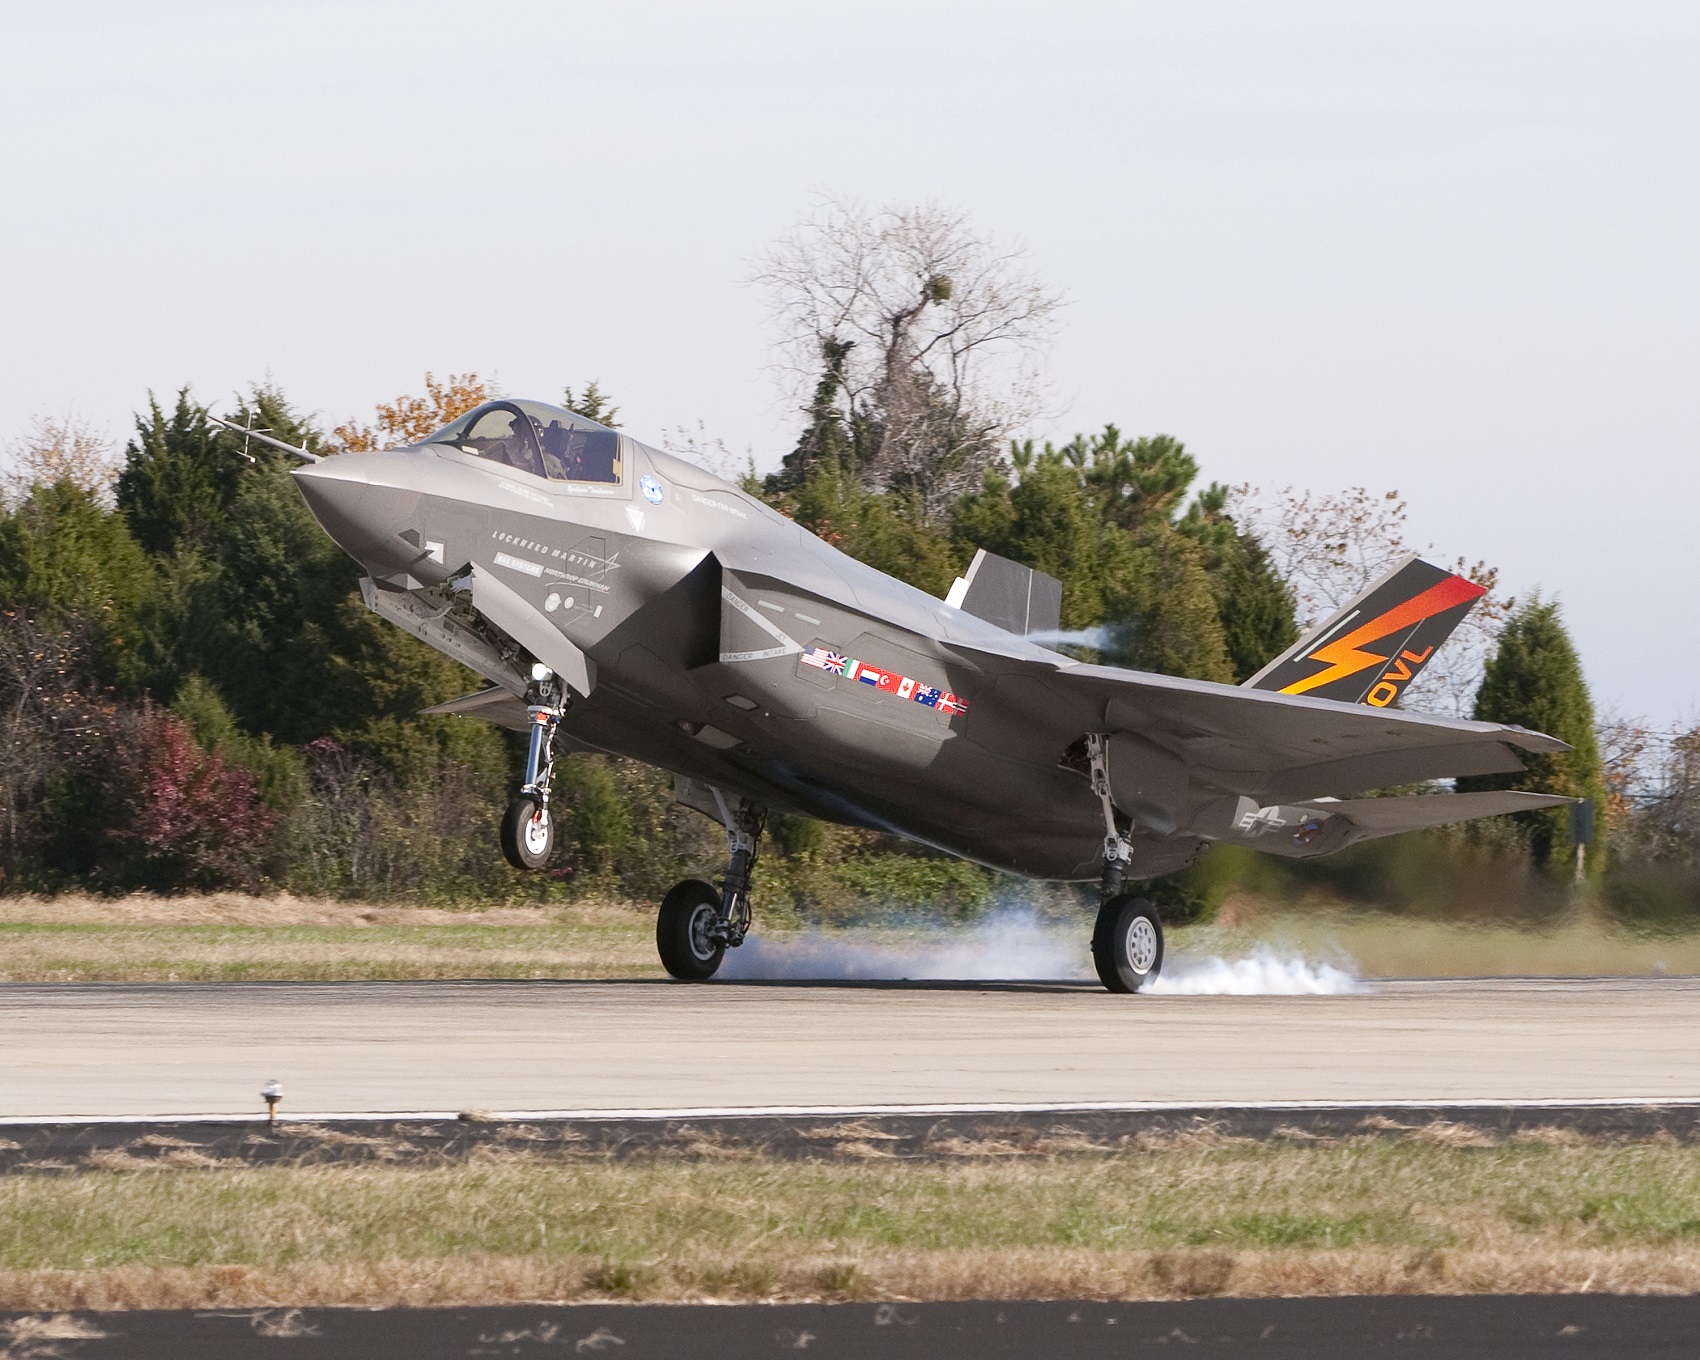 The F-35 lands at Patuxent River Naval Air Station, Maryland.